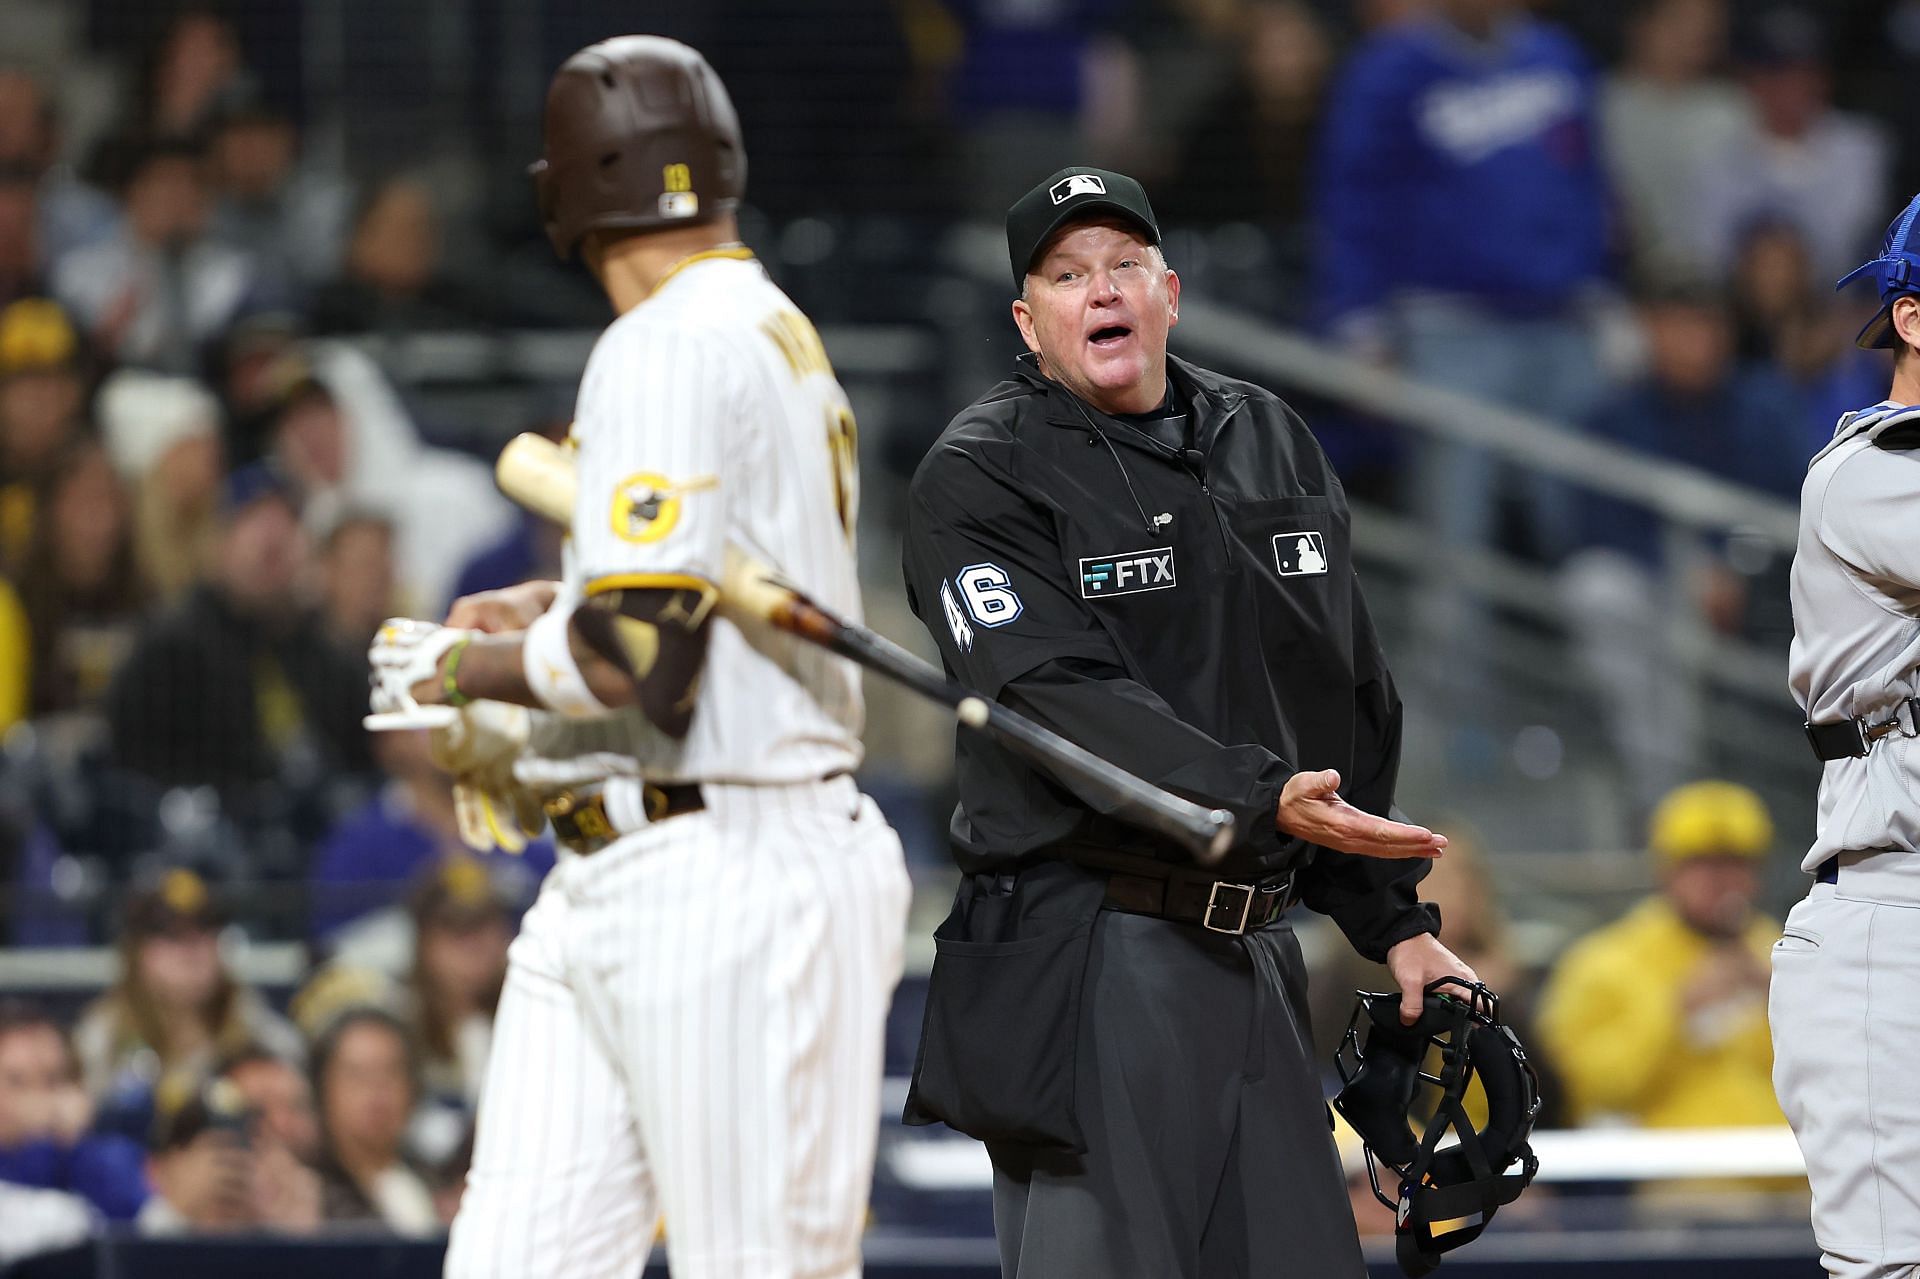 MLB: 5 changes we'd love to see from umpires in 2022 - Page 2